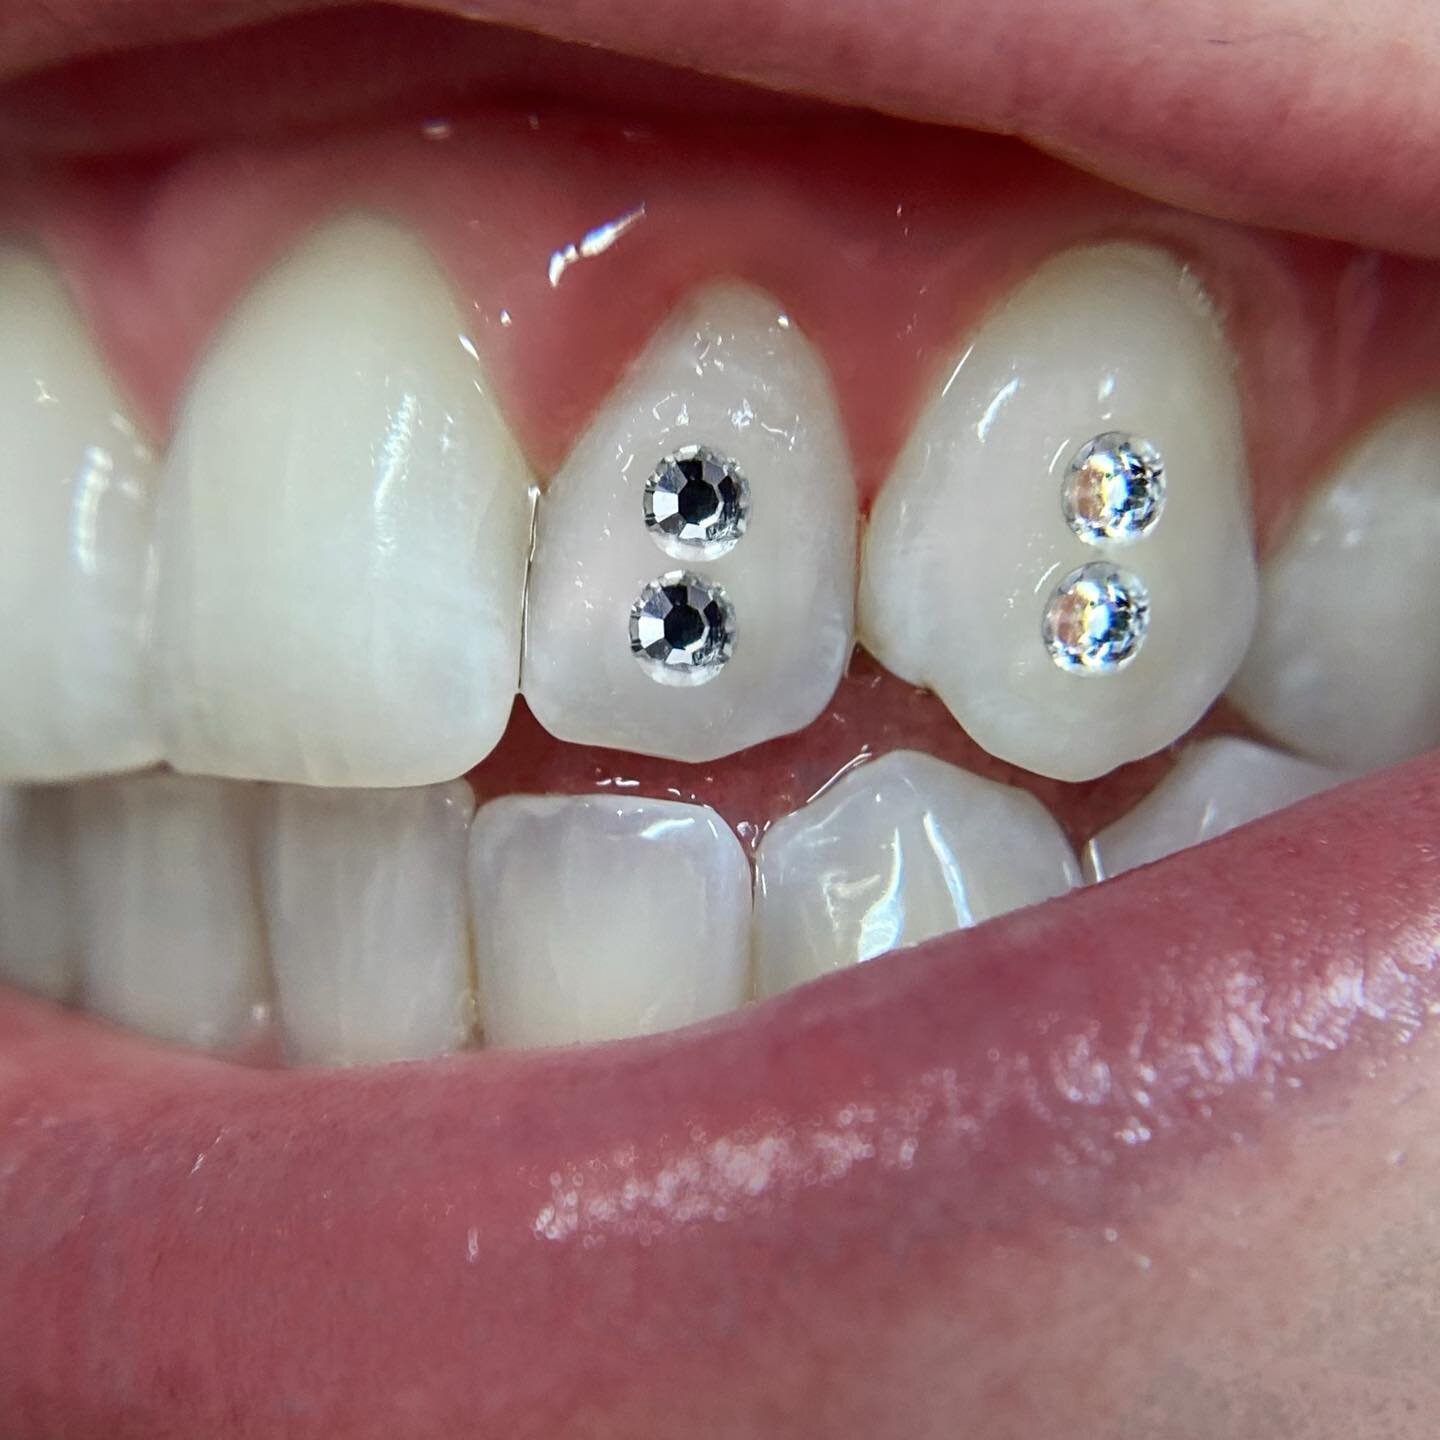 HOW TO APPLY TOOTH GEMS (NO NAIL GLUE) 